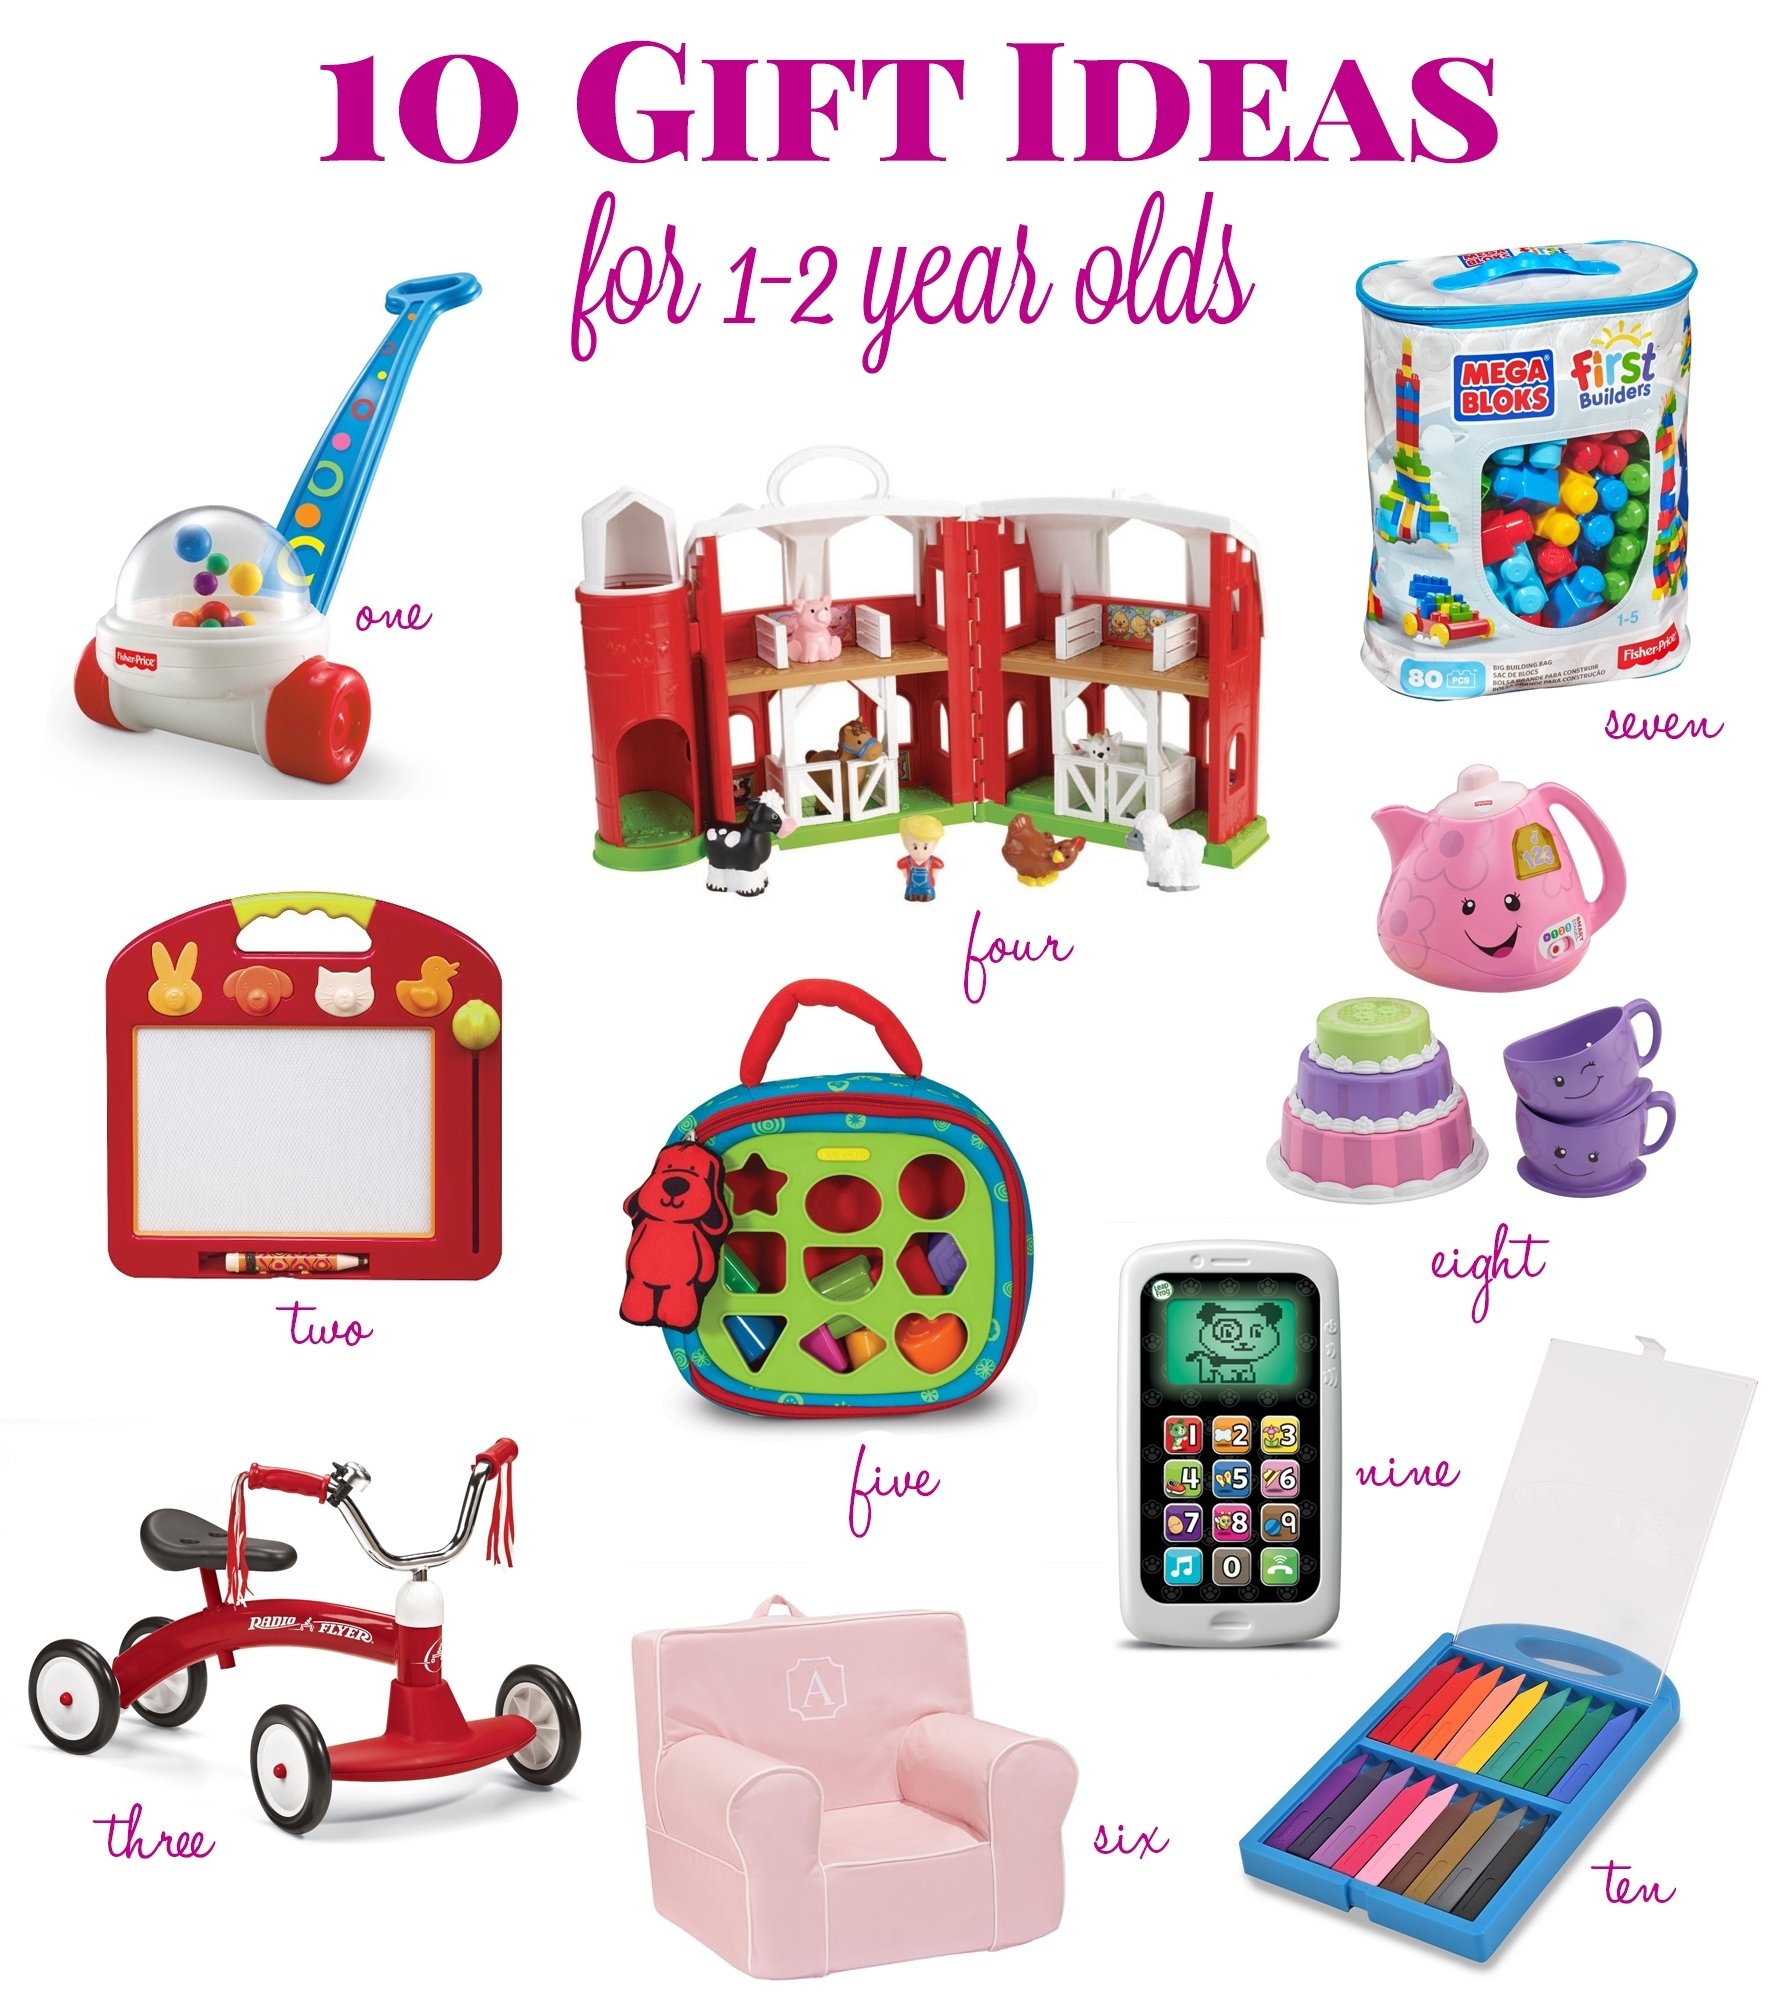 10 Lovable 4 Year Old Birthday Gift Ideas gift ideas for a 1 year old lifes tidbits 15 2022